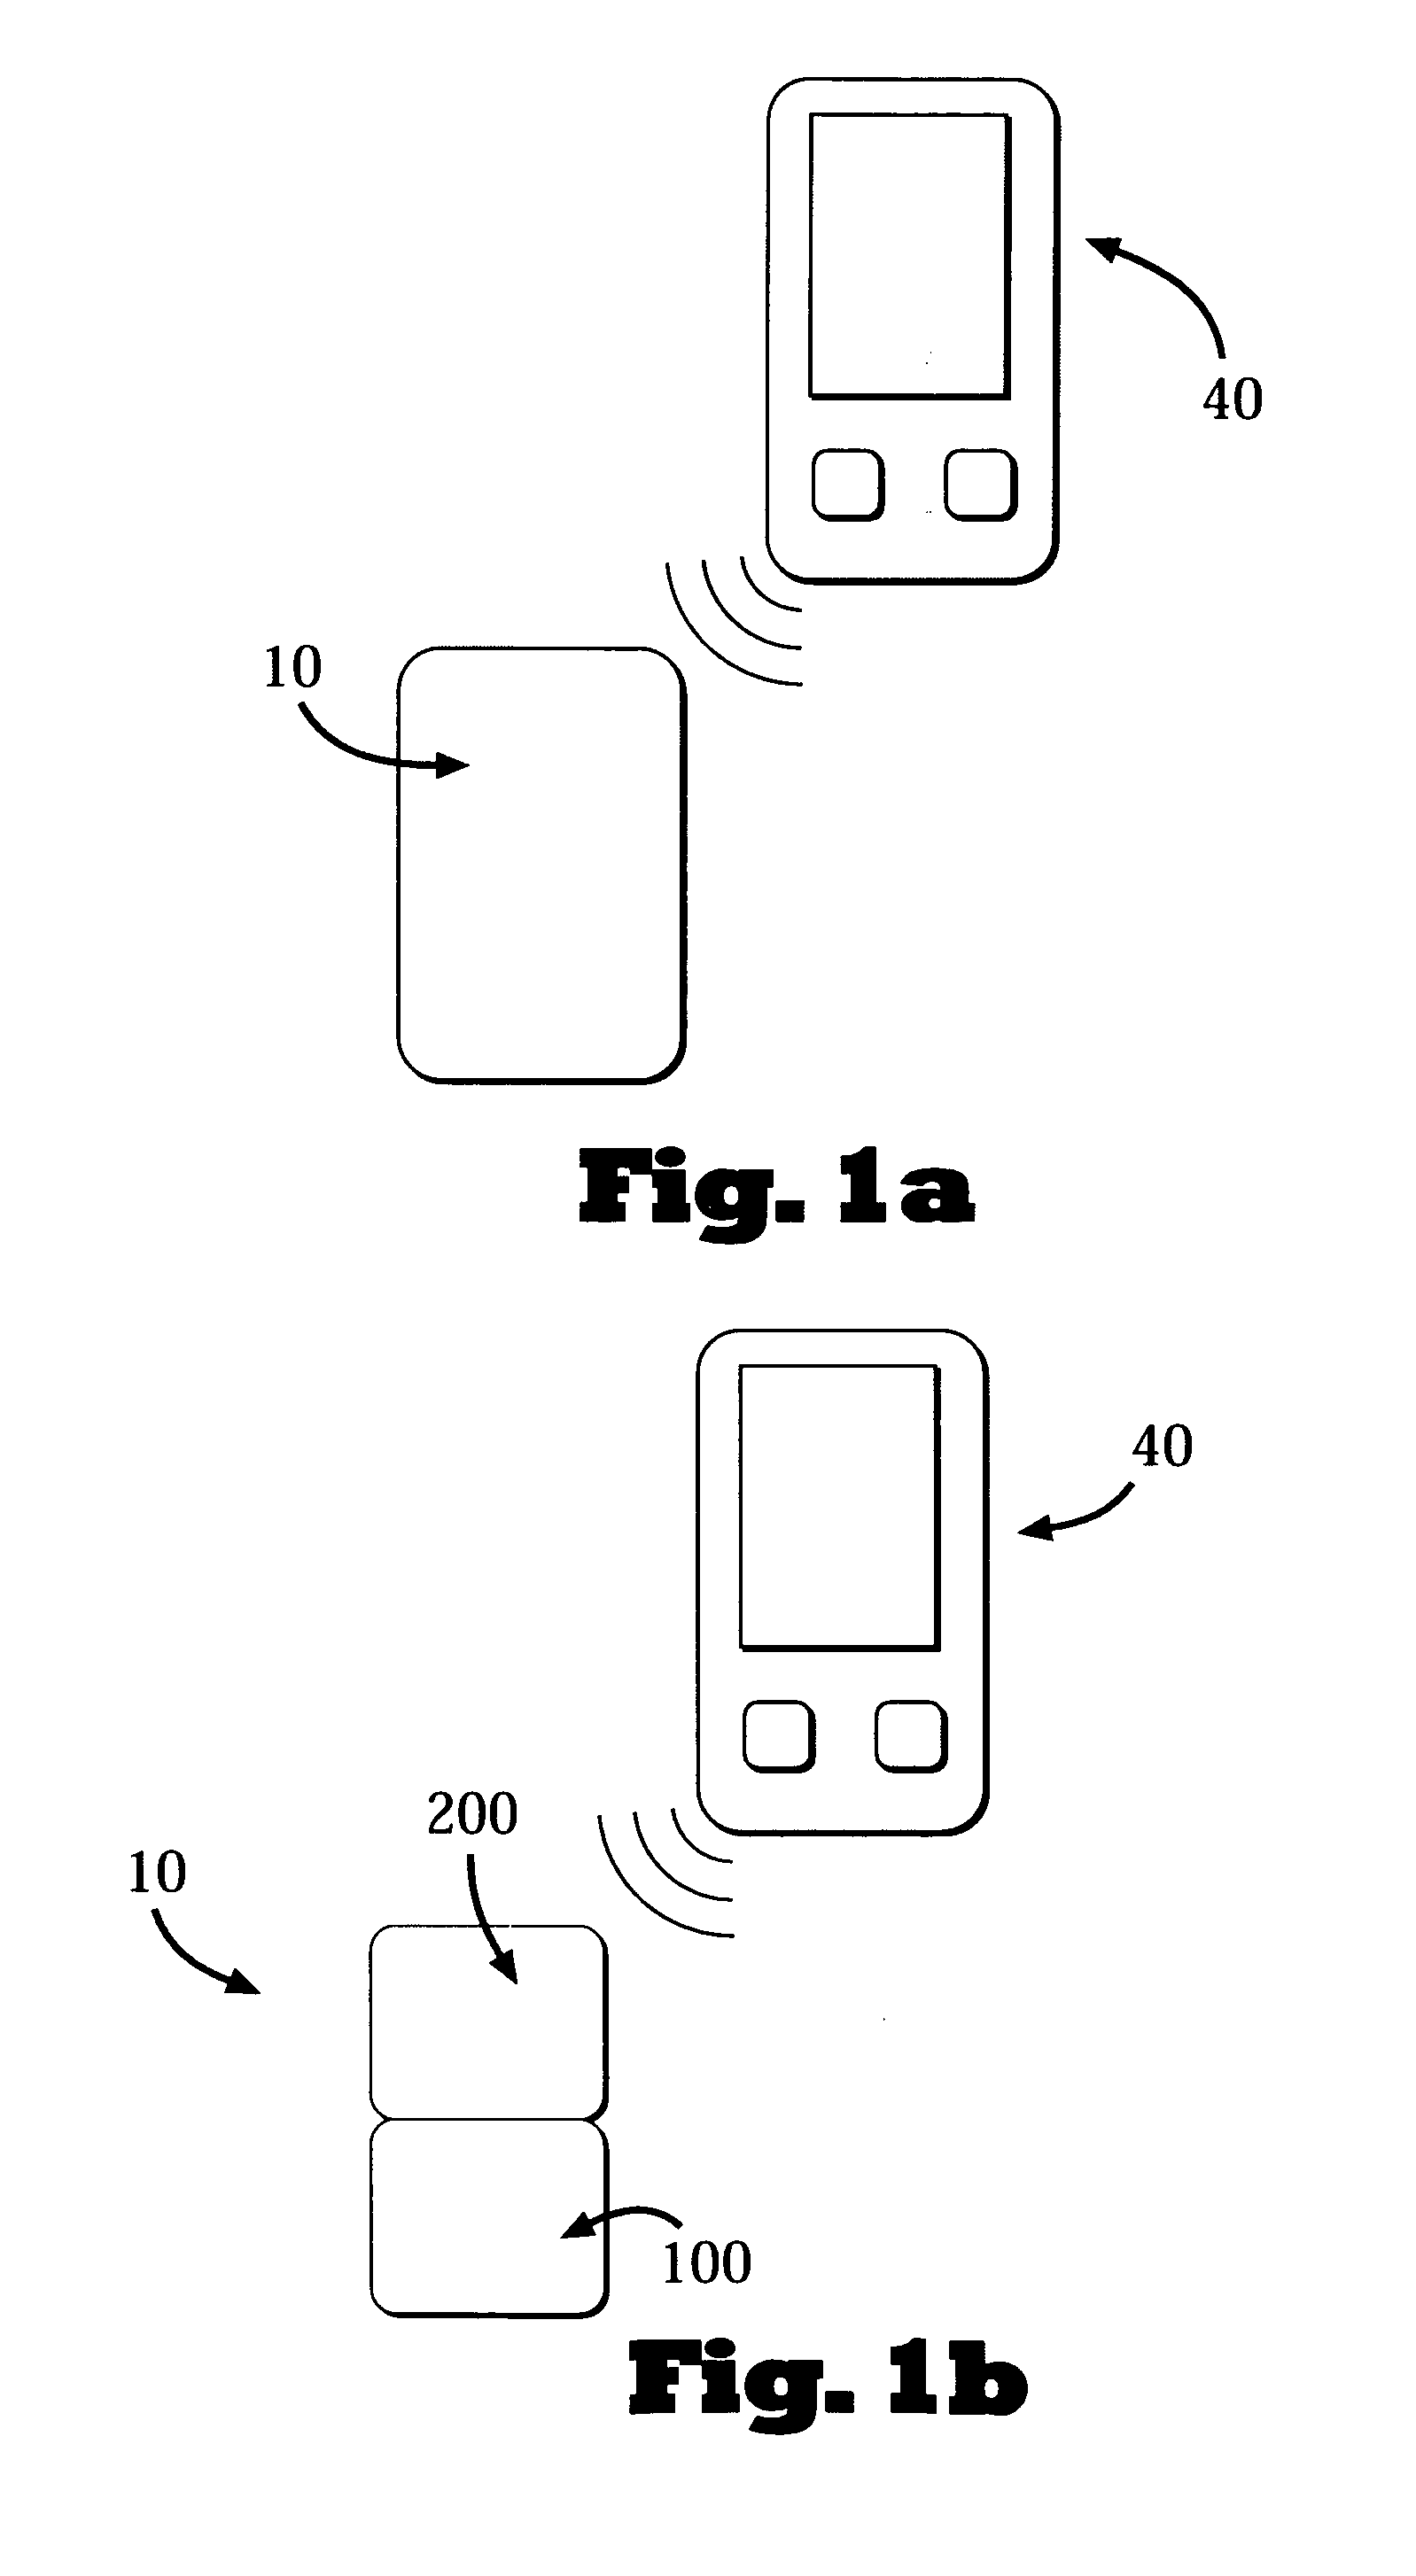 Method and System for Adaptive Communication Transmission